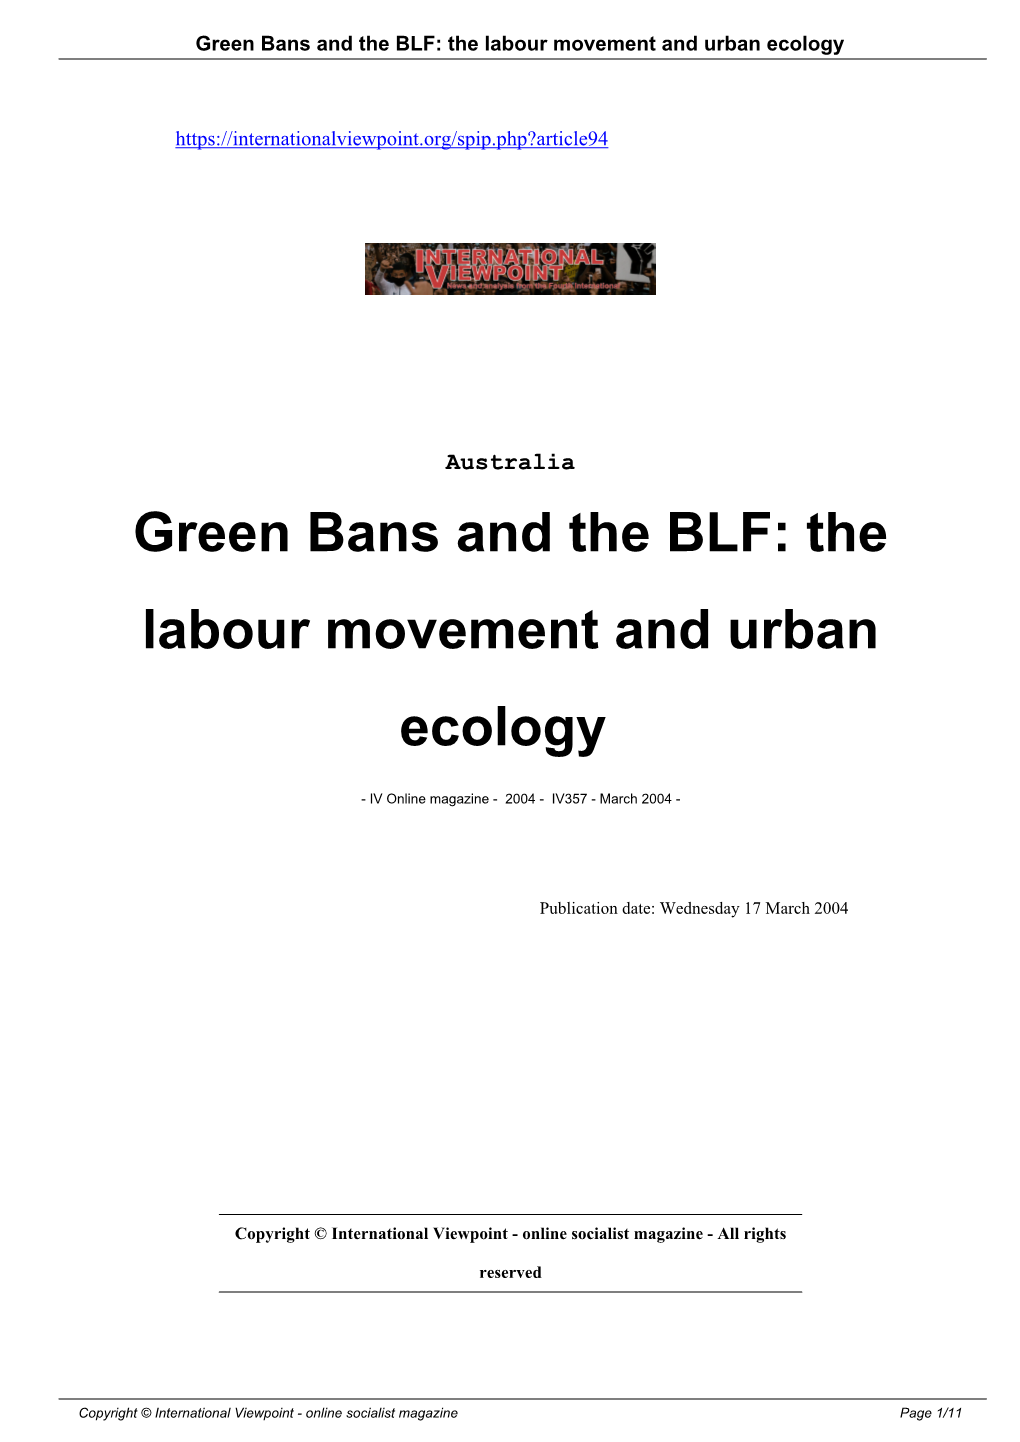 Green Bans and the BLF: the Labour Movement and Urban Ecology